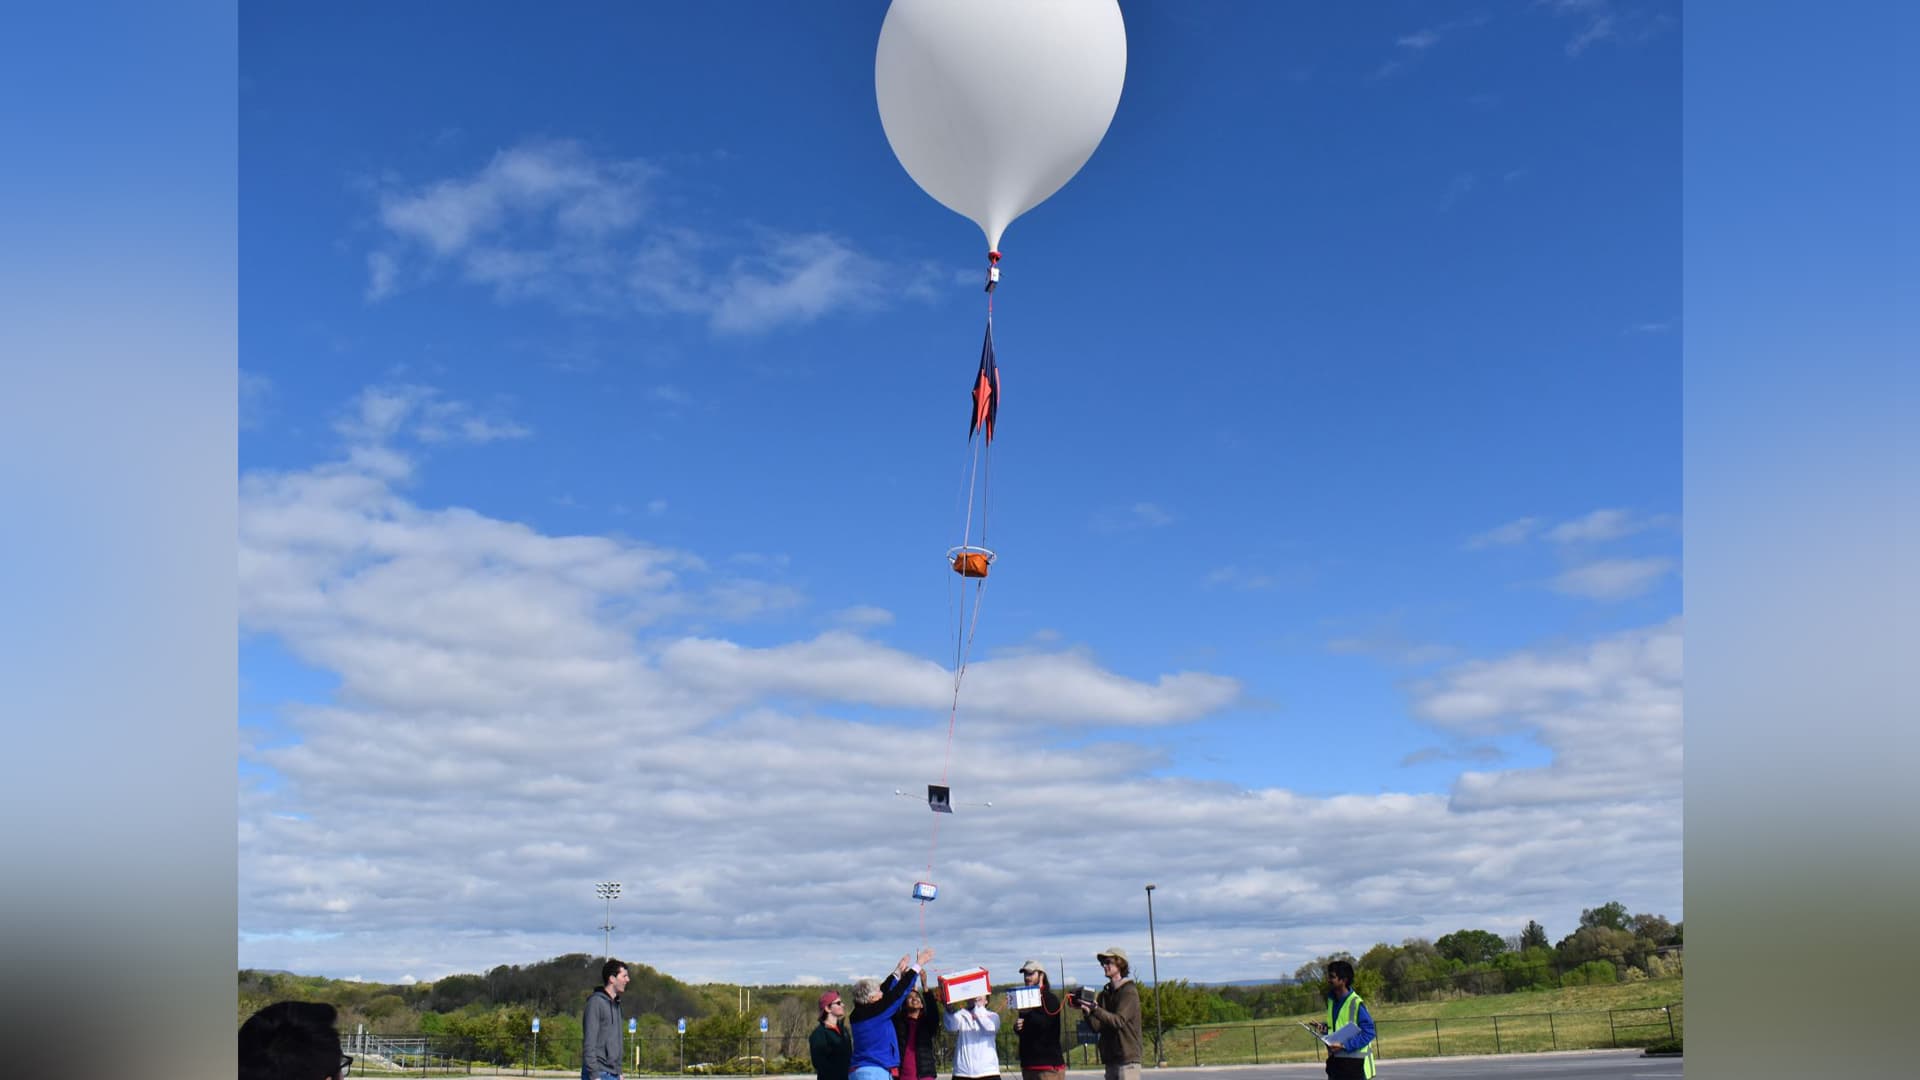 students let go of a large white balloon